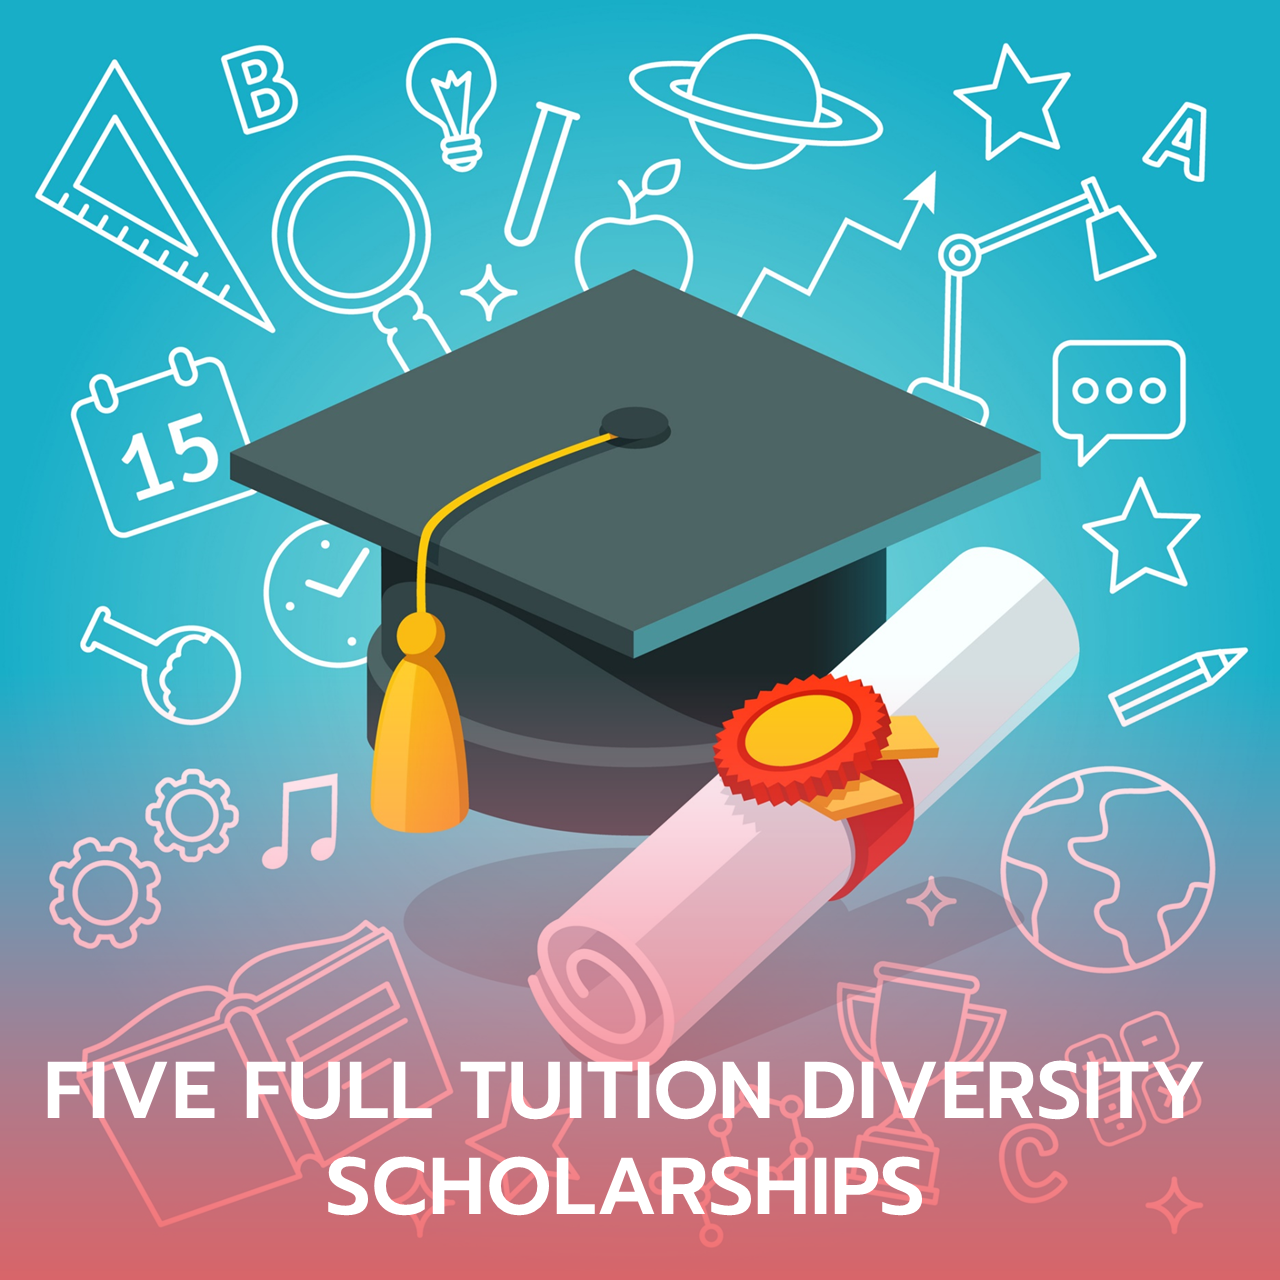  FIVE FULL TUITION DIVERSITY SCHOLARSHIPS